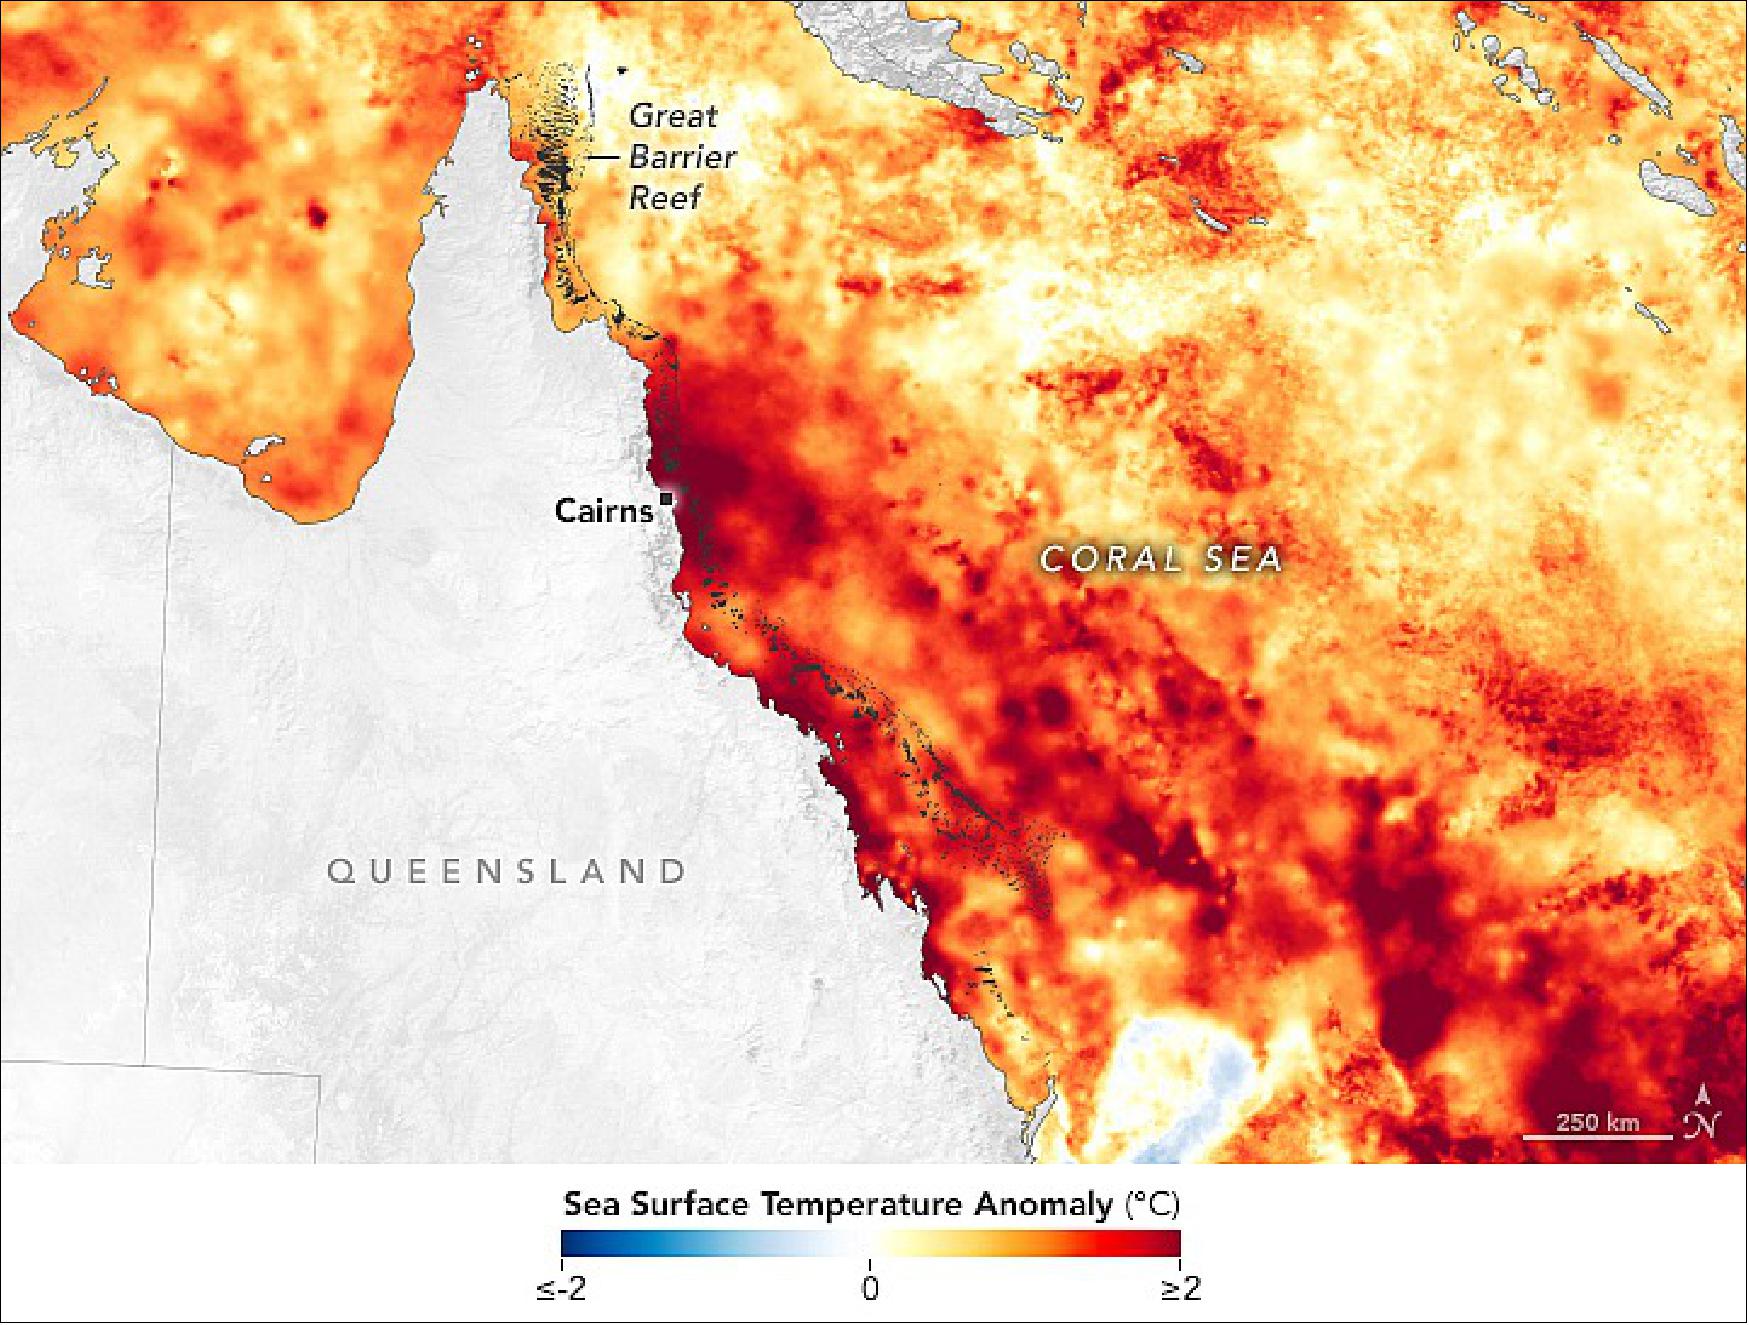 Figure 62: In early March 2022, water temperatures spiked and stayed high for several weeks, creating marine heatwave conditions. The map shows the SST anomalies off the northeast coast of Australia on March 14, 2002, when many areas were more than 2°C (3.6°F) warmer than normal. (Rather than showing absolute temperature, the anomaly reflects the difference between the daily SST and the 12-year average SST from 2003 through 2014.), [image credit: NASA Earth Observatory images by Lauren Dauphin, using data from the Multiscale Ultrahigh Resolution (MUR) project, reef information from the Great Barrier Reef Marine Park Authority (GBRMPA) and Landsat data from the U.S. Geological Survey. Story by Sara E. Pratt]